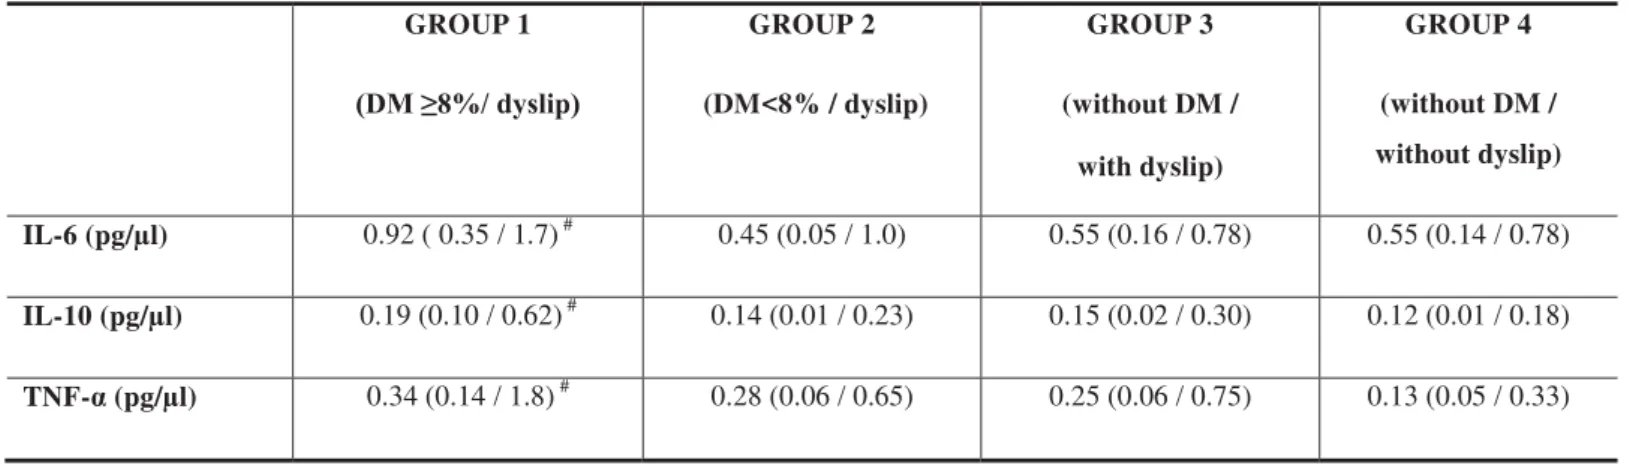 TABLE 2. Local cytokine expression in gingival crevicular fluid [Median (25 th / 75th percentiles)] GROUP 1  '0G\VOLS GROUP 2 (DM&lt;8% / dyslip) GROUP 3  (without DM / with dyslip) GROUP 4  (without DM / without dyslip) IL-6 (pg/μl) 0.92 ( 0.35 /